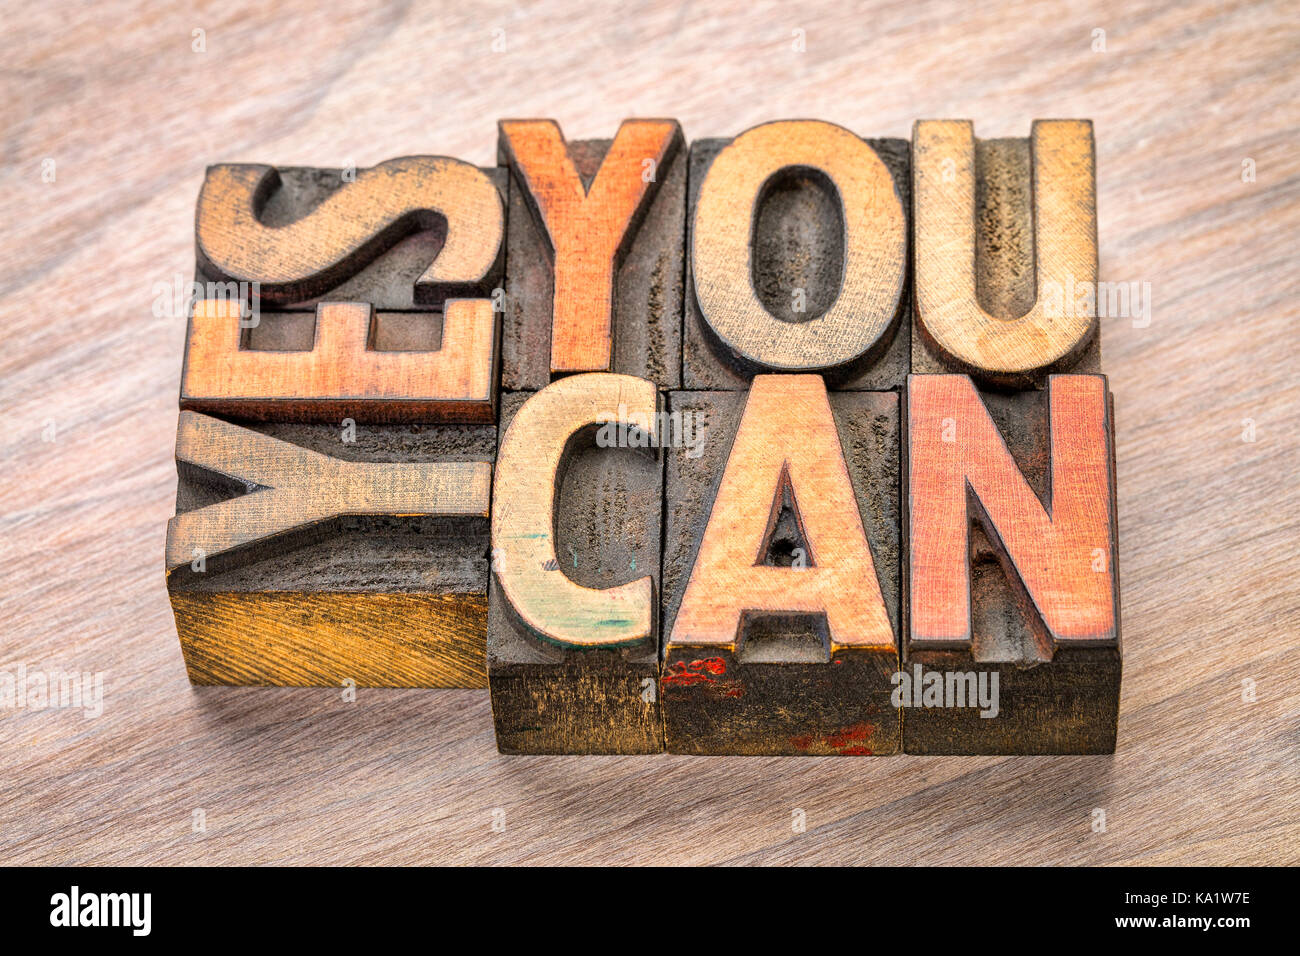 yes, you can - motivational word abstract in vintage letterpress wood type blocks Stock Photo